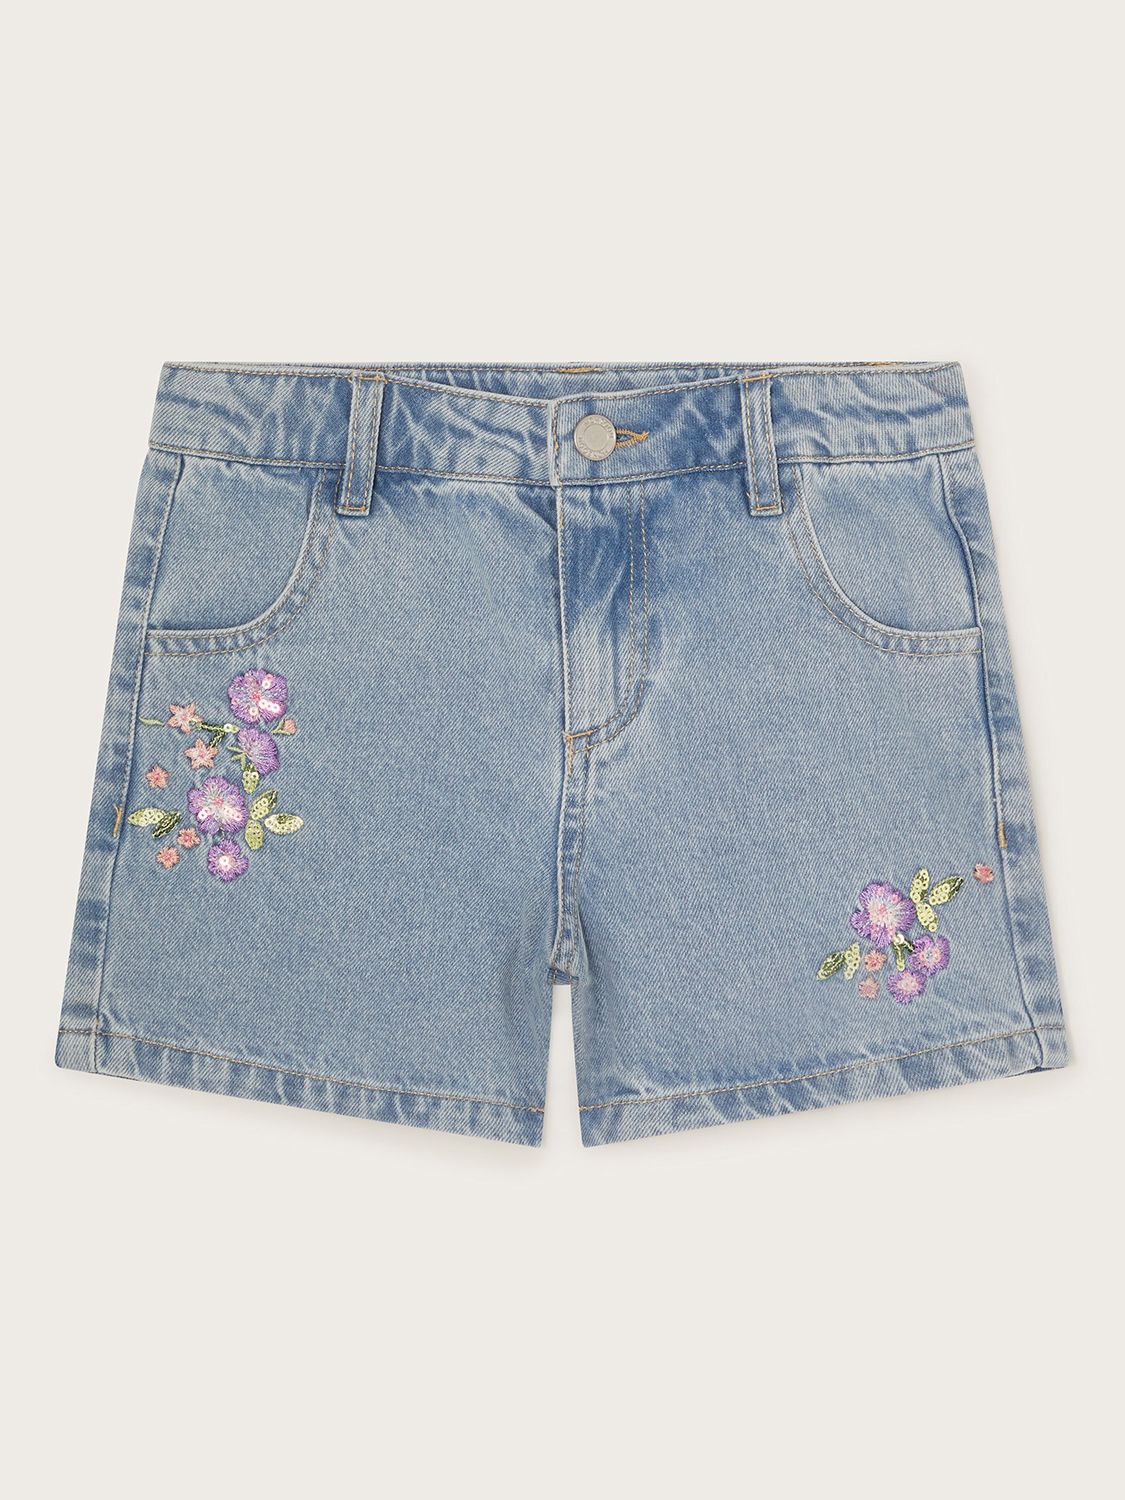 Monsoon Kids' Floral Embroidered Denim Shorts, Blue, 3 years